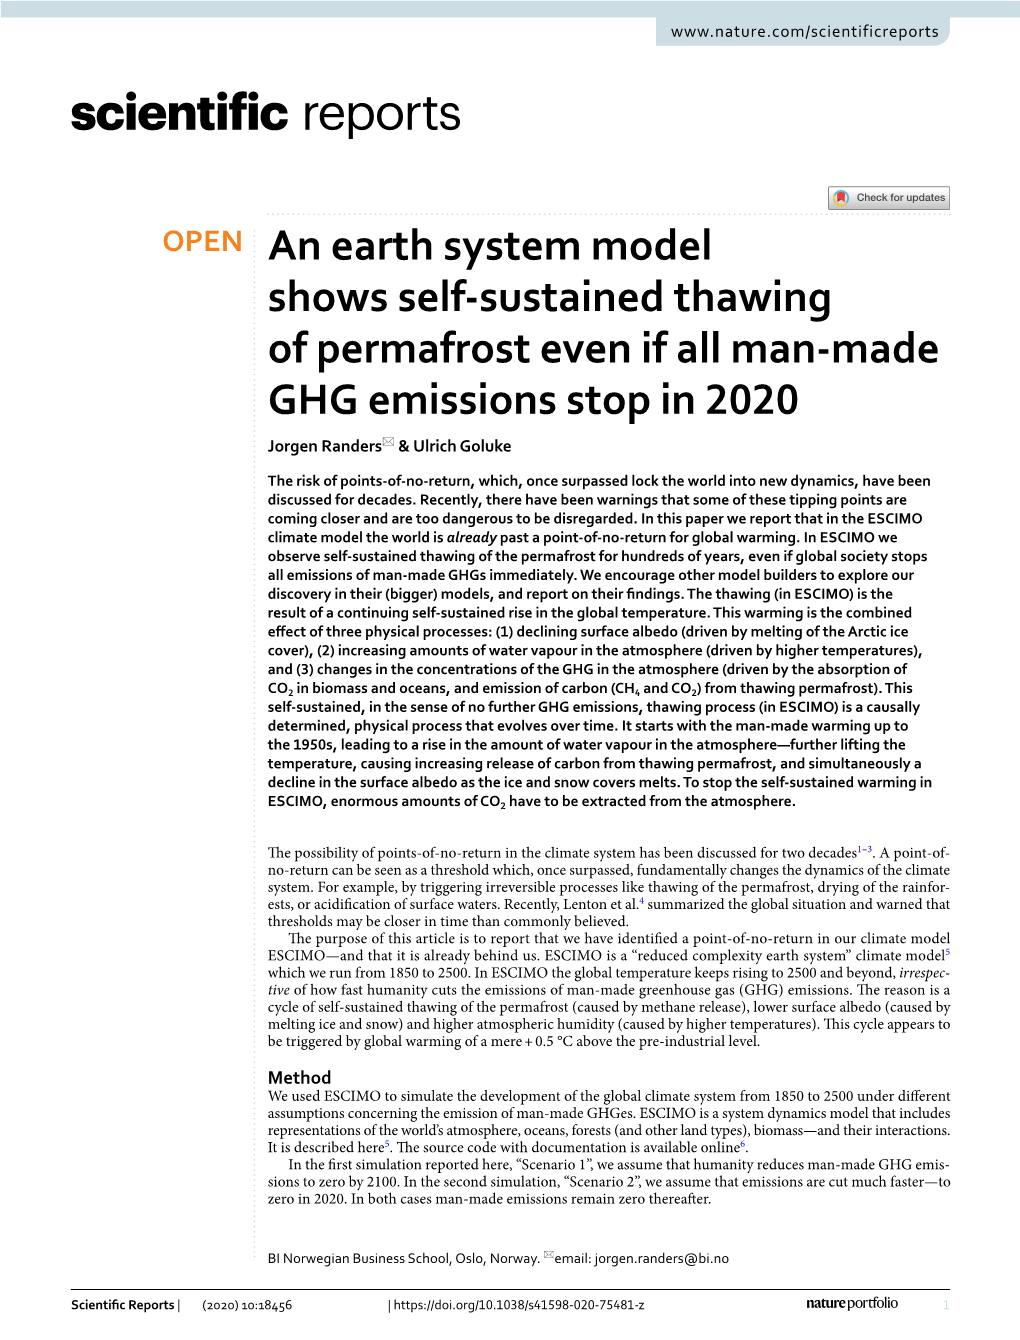 An Earth System Model Shows Self-Sustained Thawing of Permafrost Even If All Man-Made GHG Emissions Stop in 2020